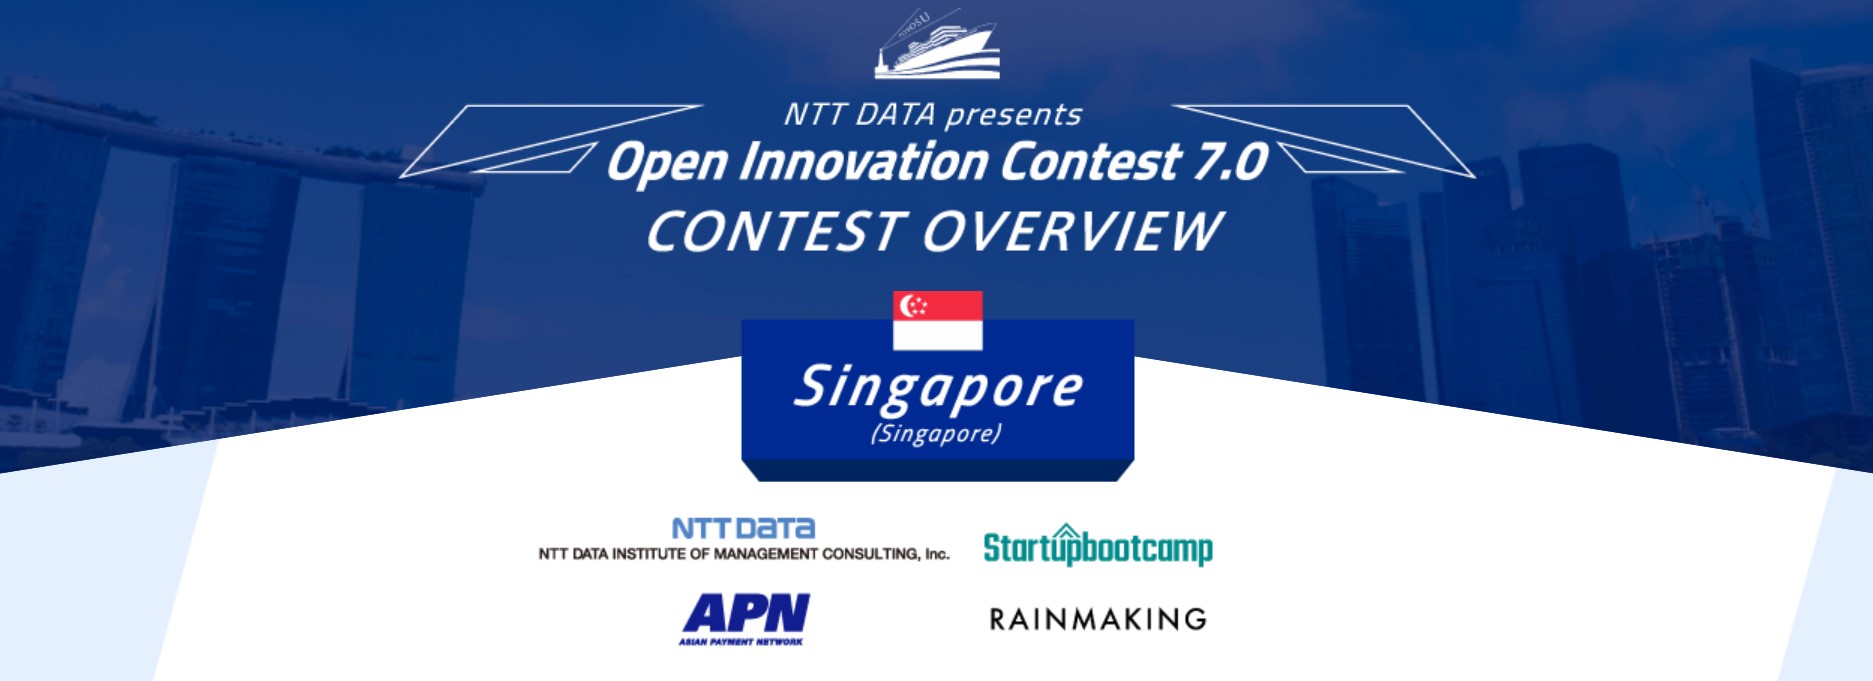 FOMO Pay wins the Singapore Preliminary Open Innovation Contest 7.0 by NTT DATA